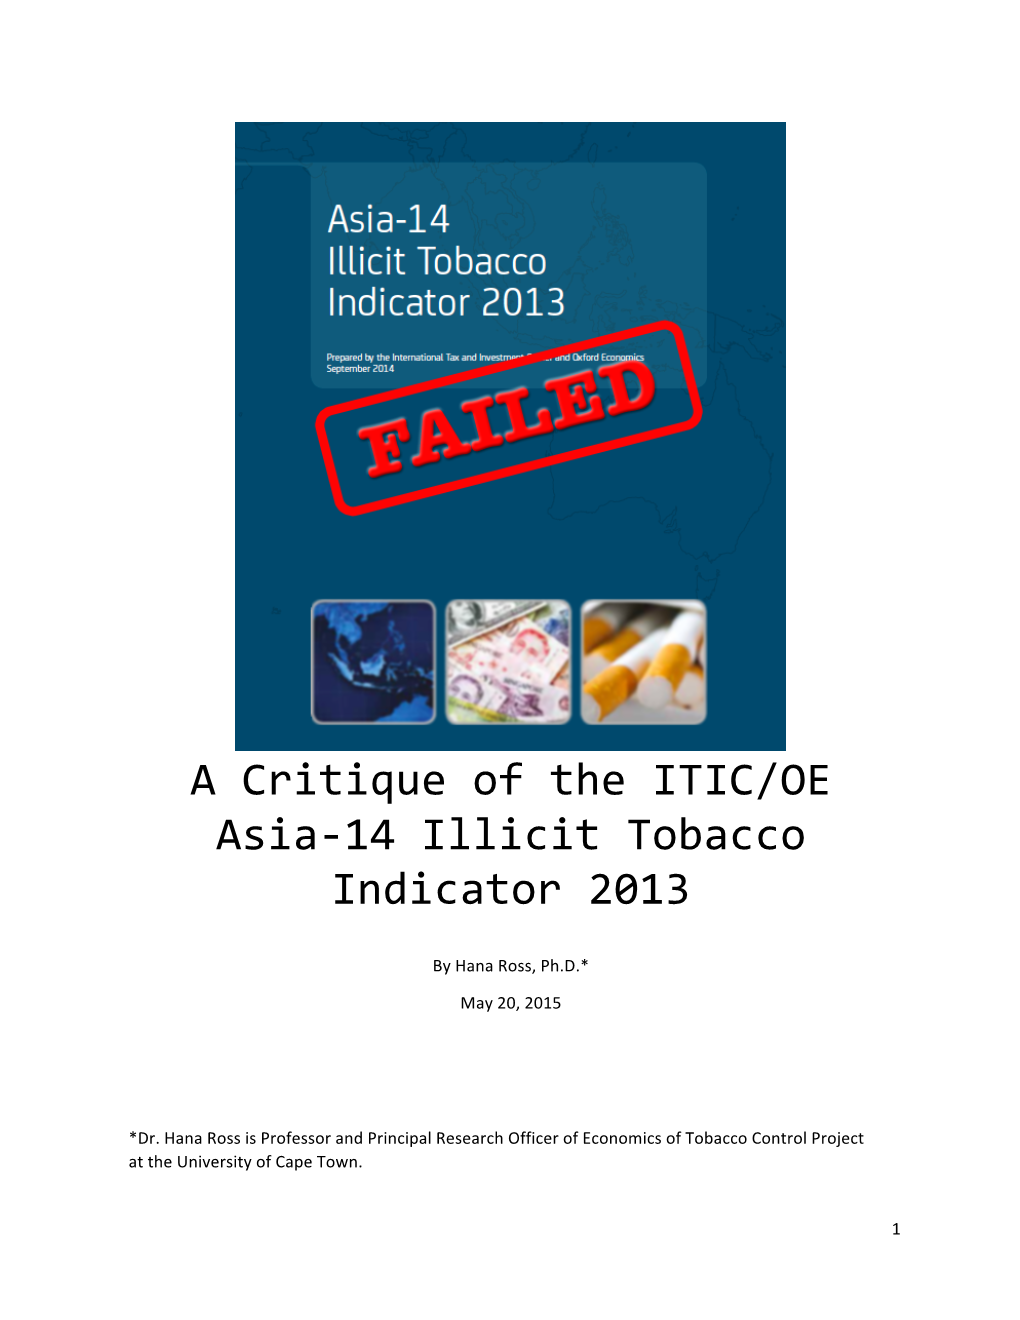 A Critique of the ITIC/OE Asia-‐14 Illicit Tobacco Indicator 2013